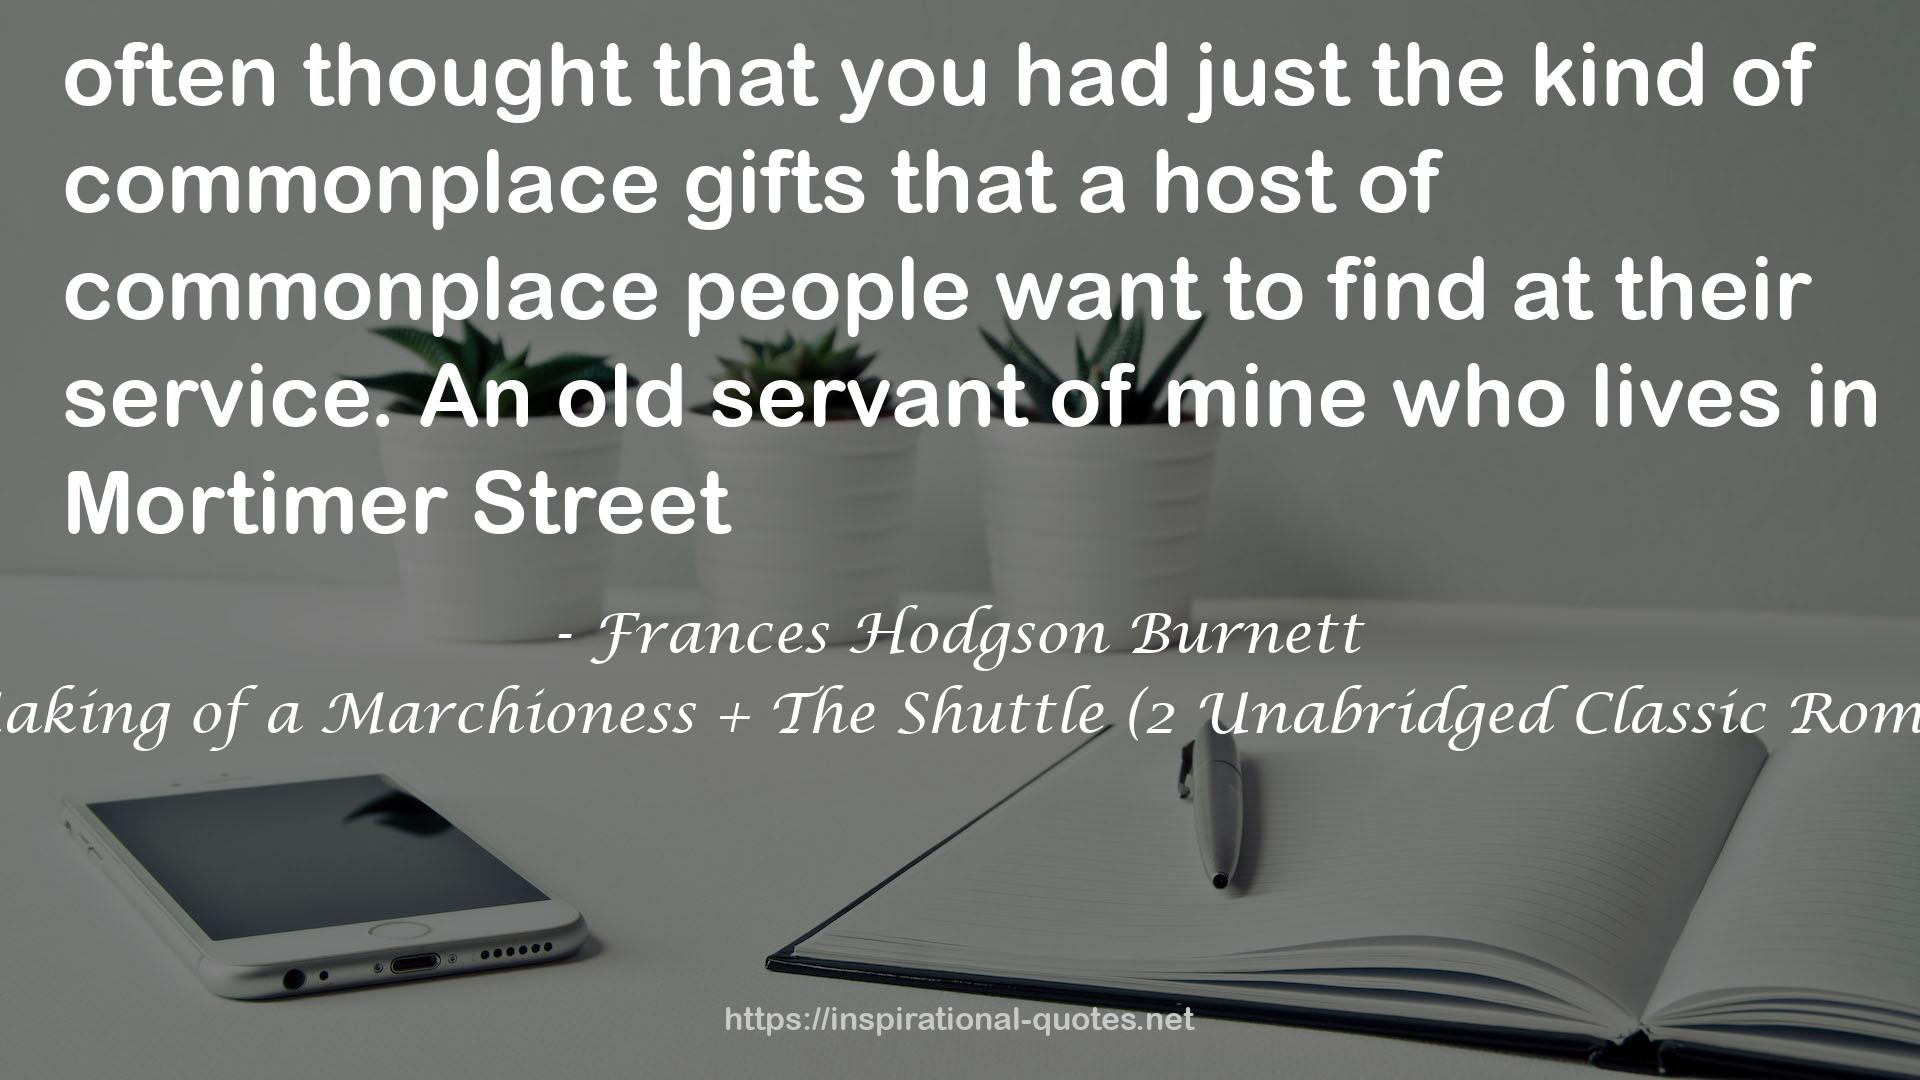 The Making of a Marchioness + The Shuttle (2 Unabridged Classic Romances) QUOTES